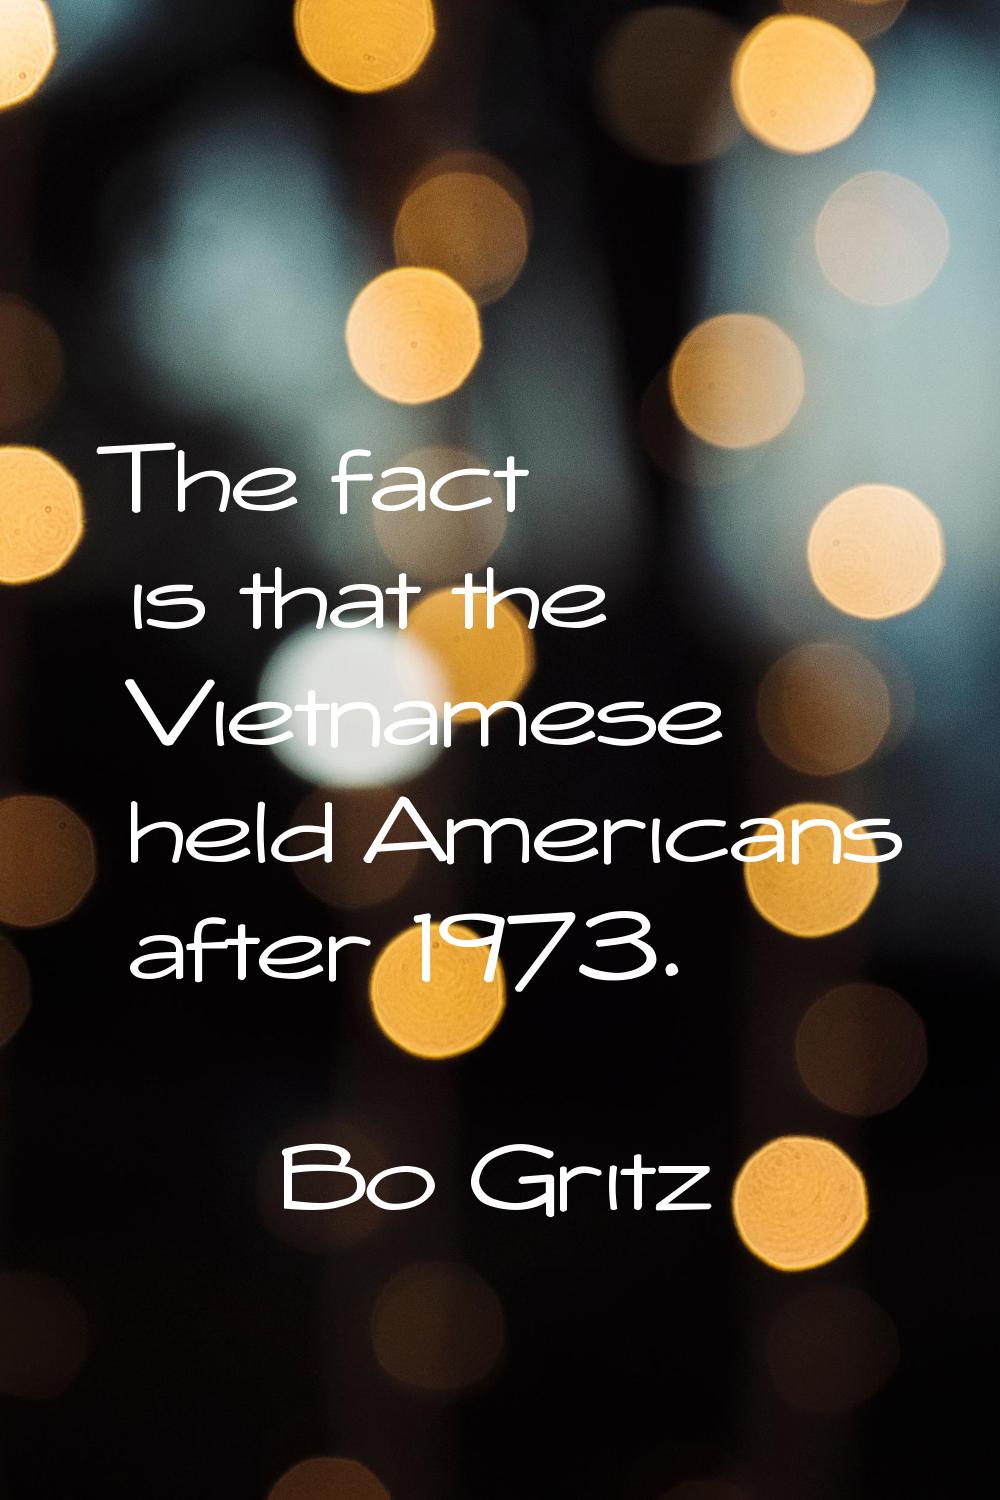 The fact is that the Vietnamese held Americans after 1973.